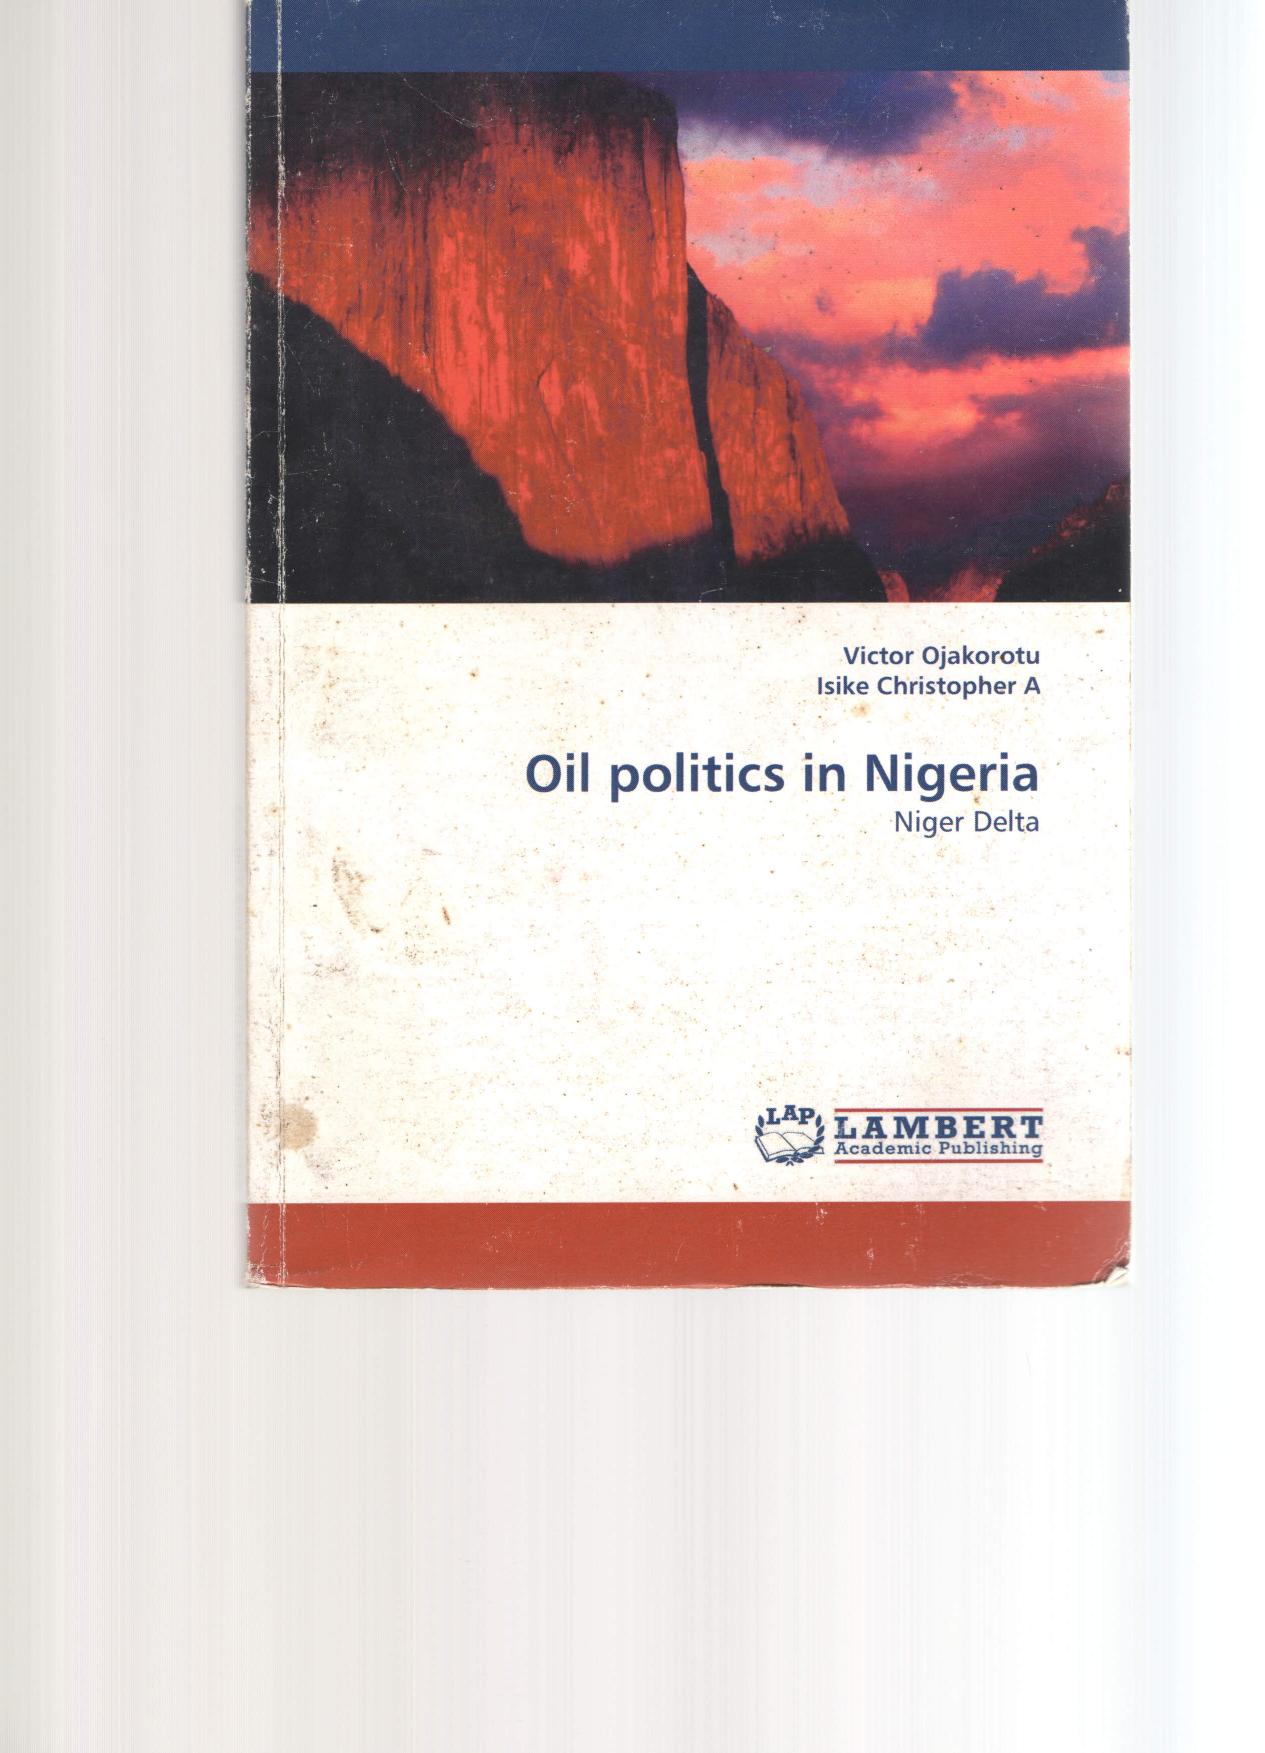 Social and cultural impact analysis of oil exploitation(1) 2010